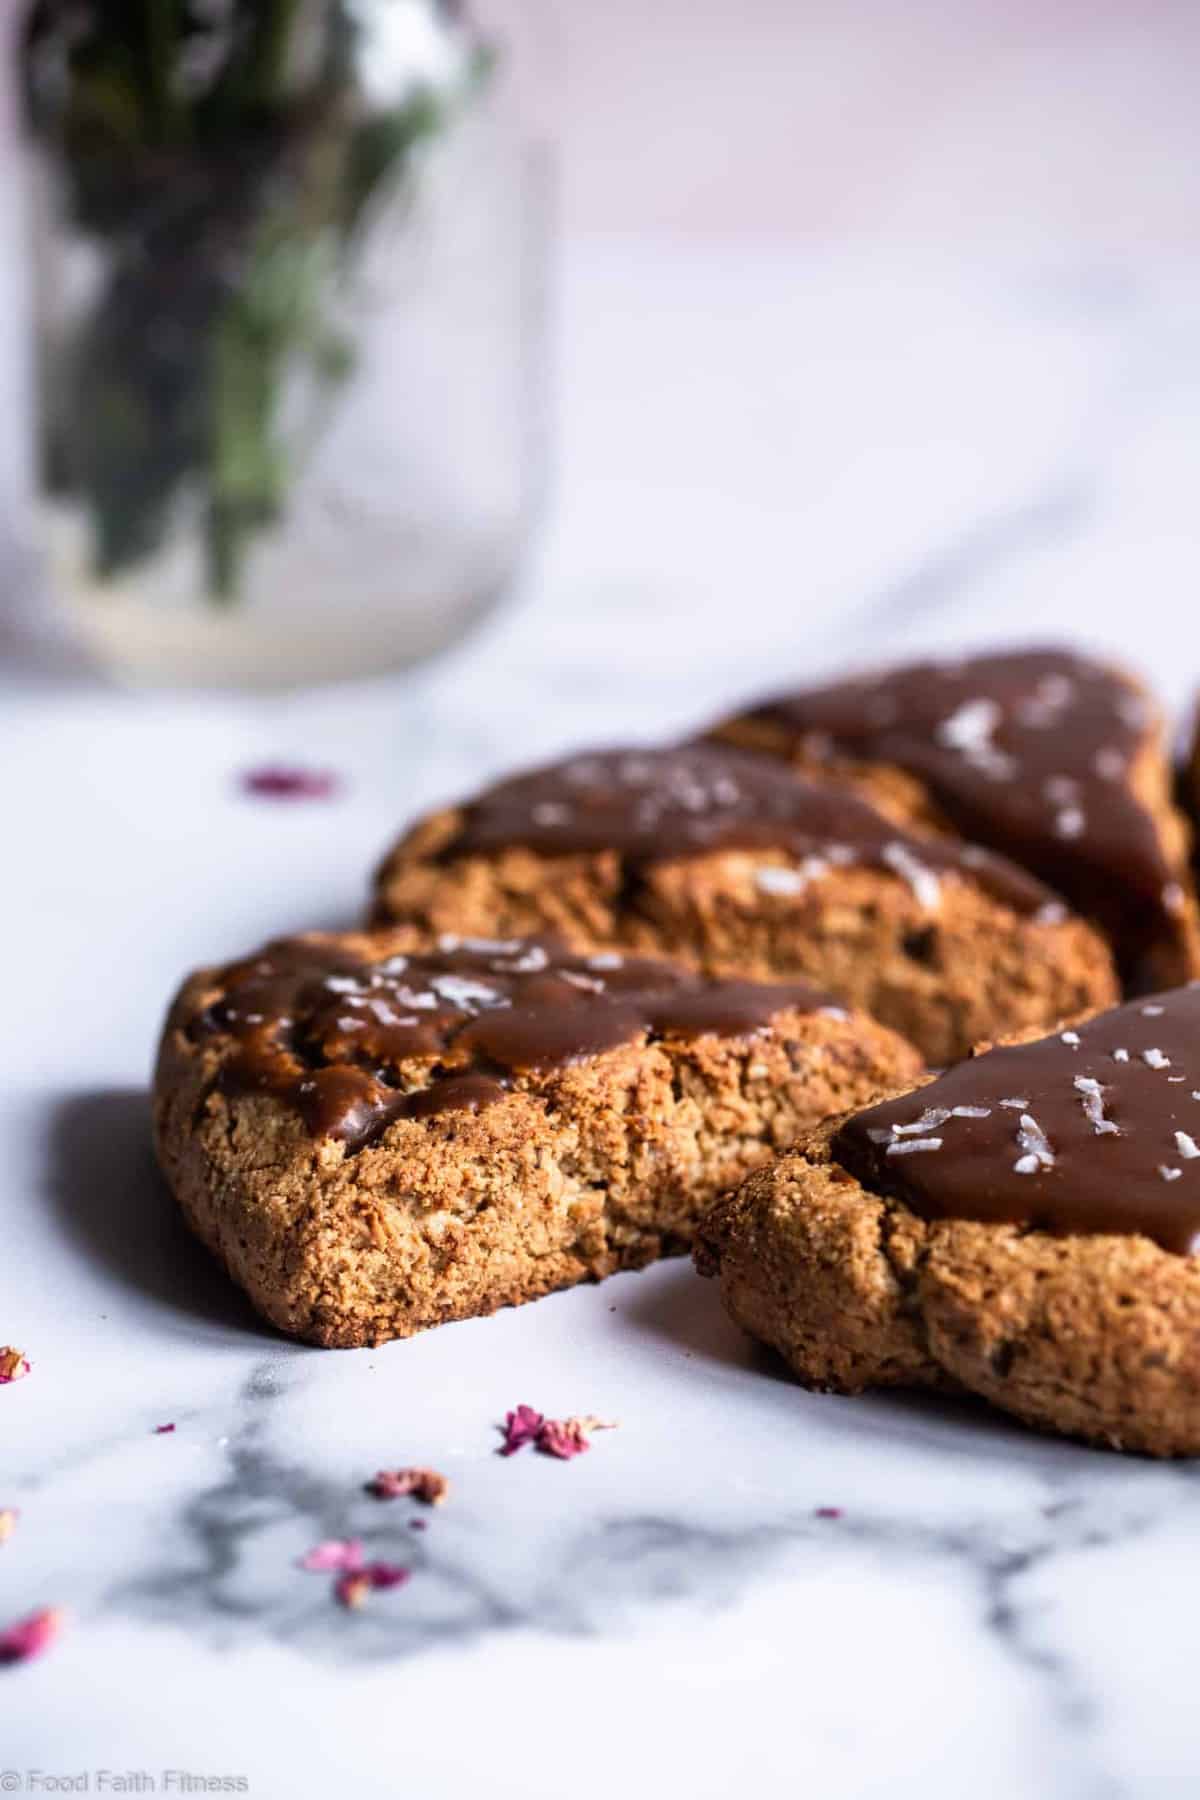 Healthy Gluten Free Samoa Scones with Greek Yogurt - These Healthy Gluten Free Scones are an easy, better for you breakfast that tastes like a scone and a Samoa cookie had a baby! Dairy free option included! | #Foodfaithfitness | #Glutenfree #Dairyfree #Healthy #Scones #Breakfast